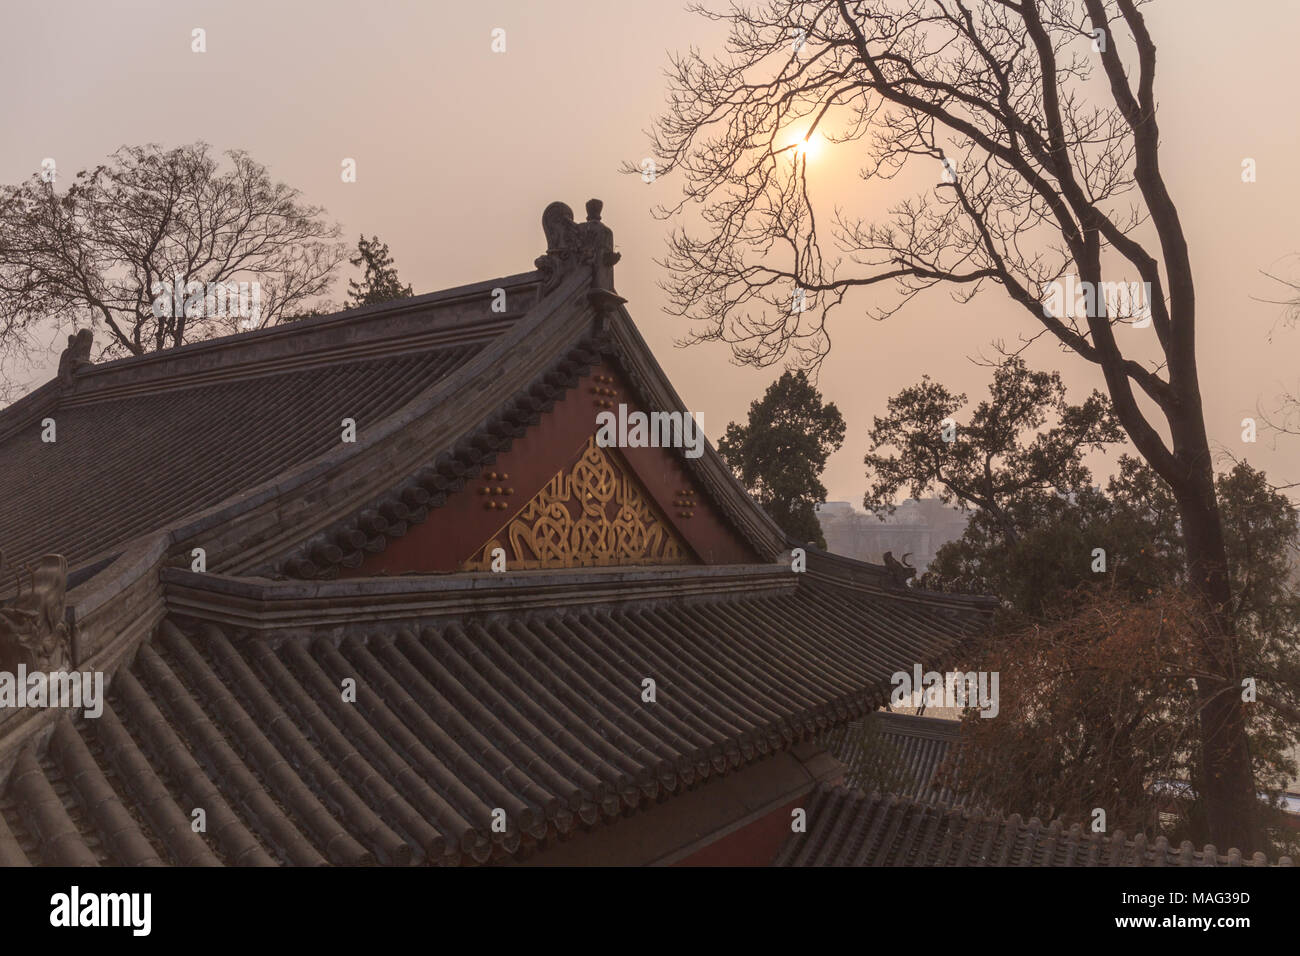 Smoggy sunset over historic temples at Beihai Park in Beijing, China. Stock Photo